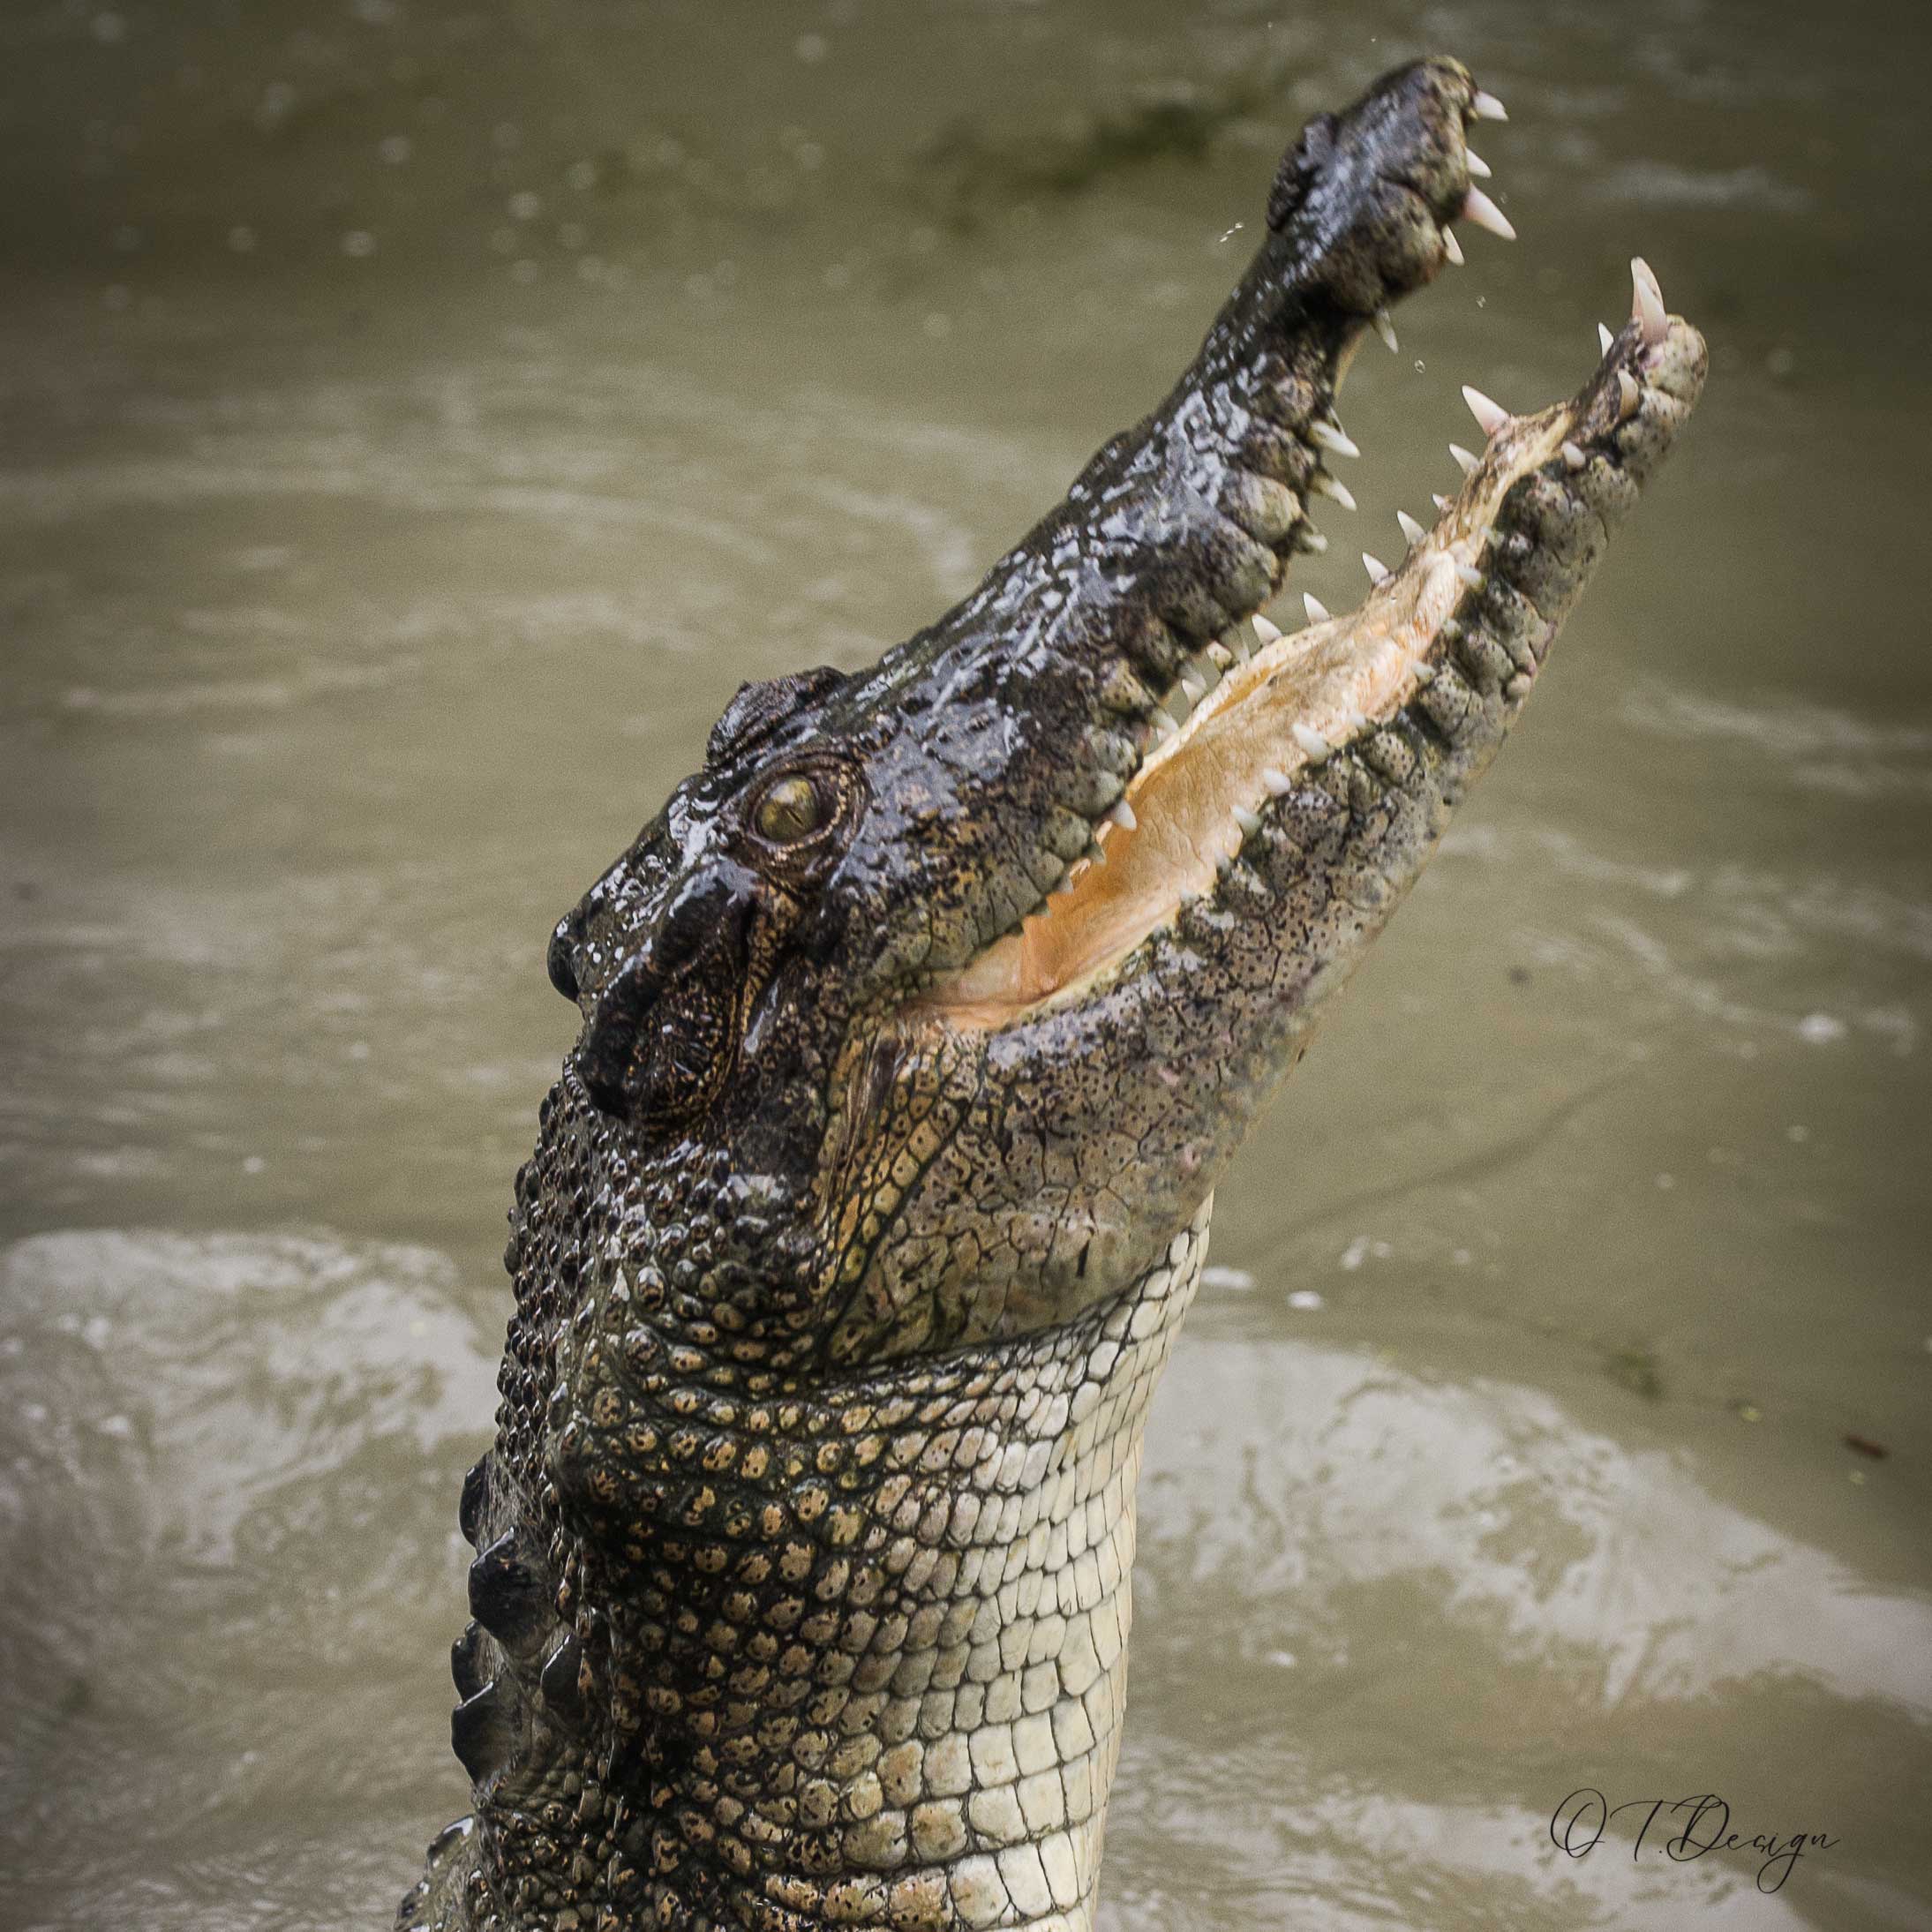 Crocodiles inside the water in their own habitat in Cairns, Australia